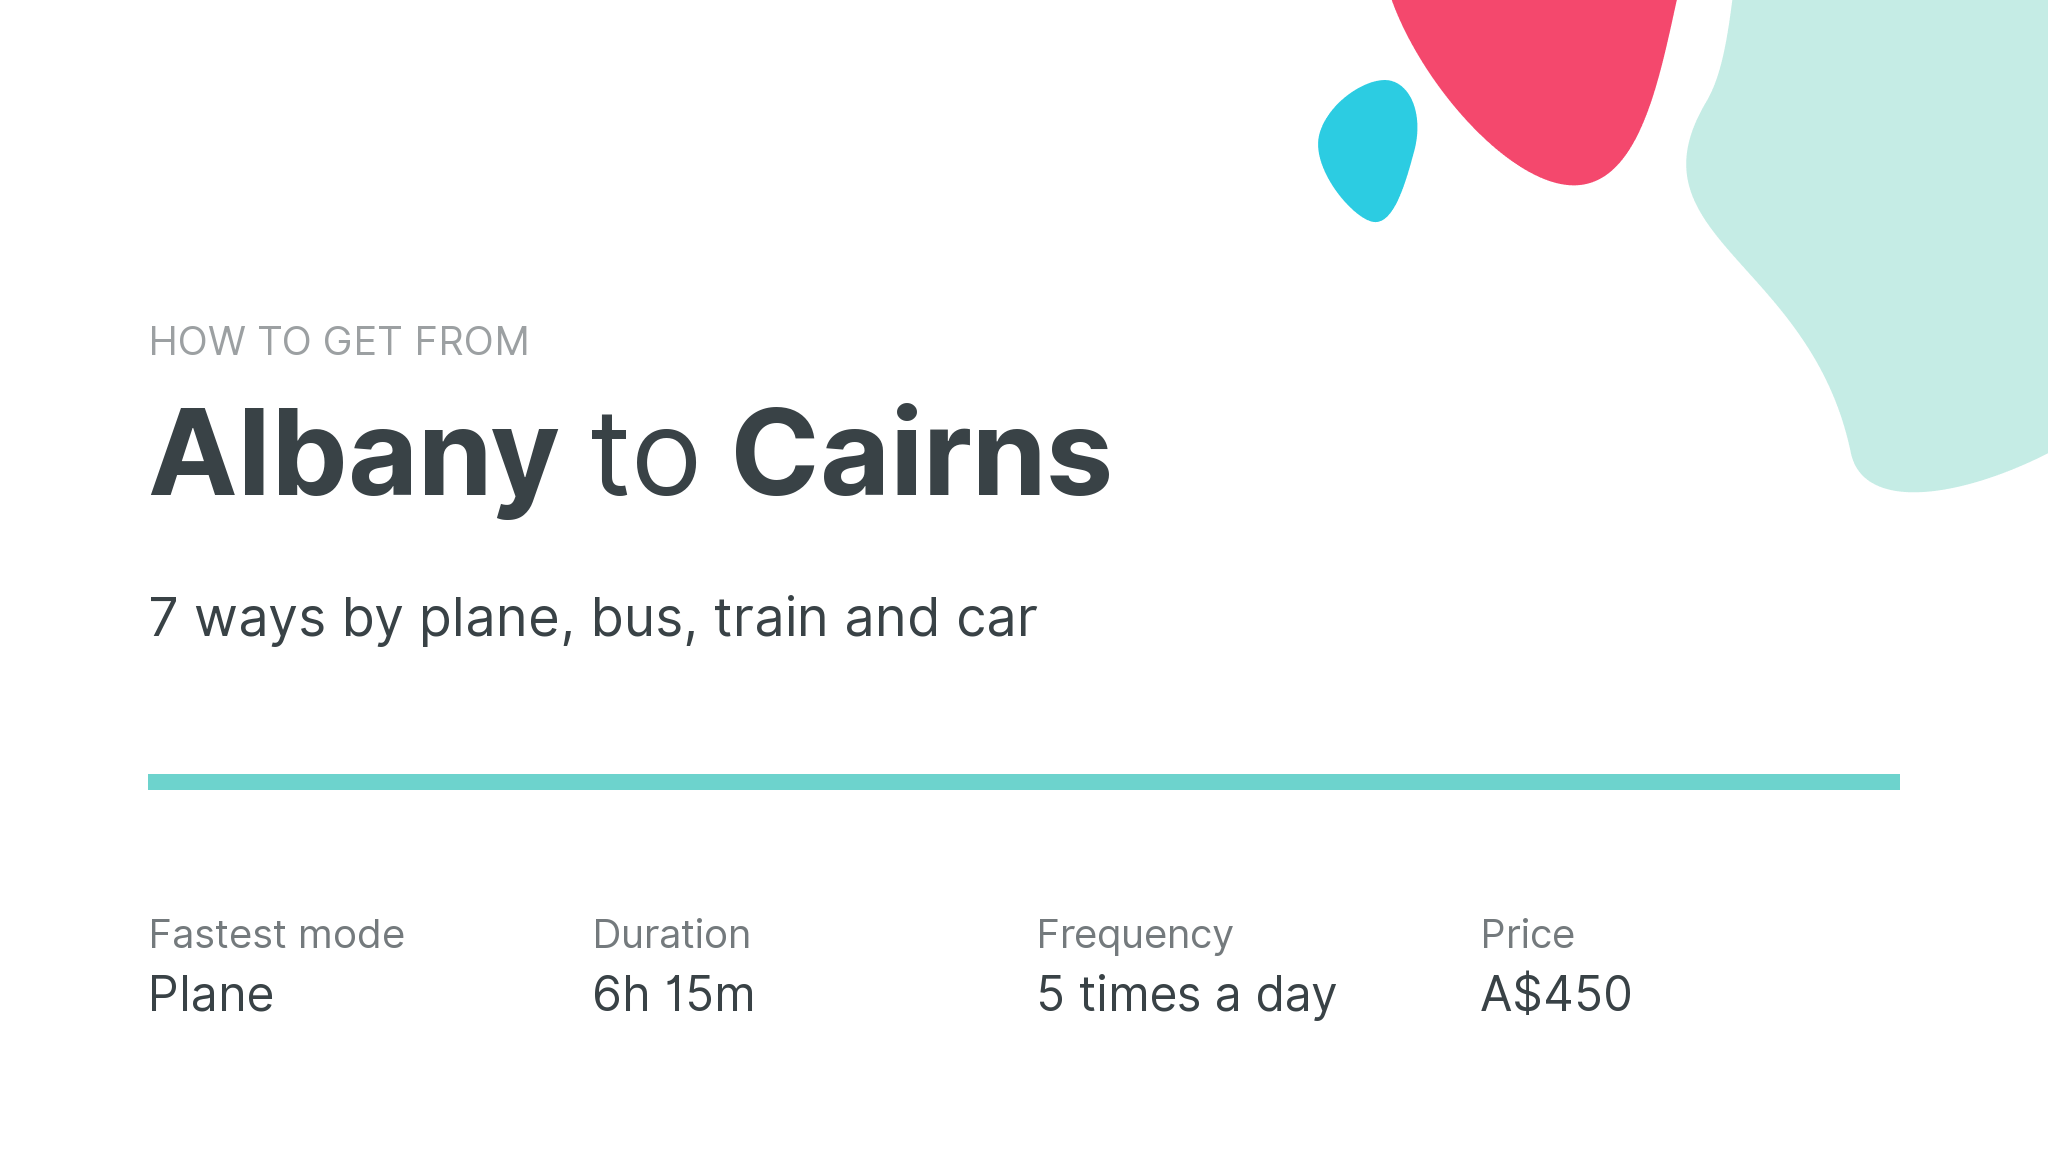 How do I get from Albany to Cairns